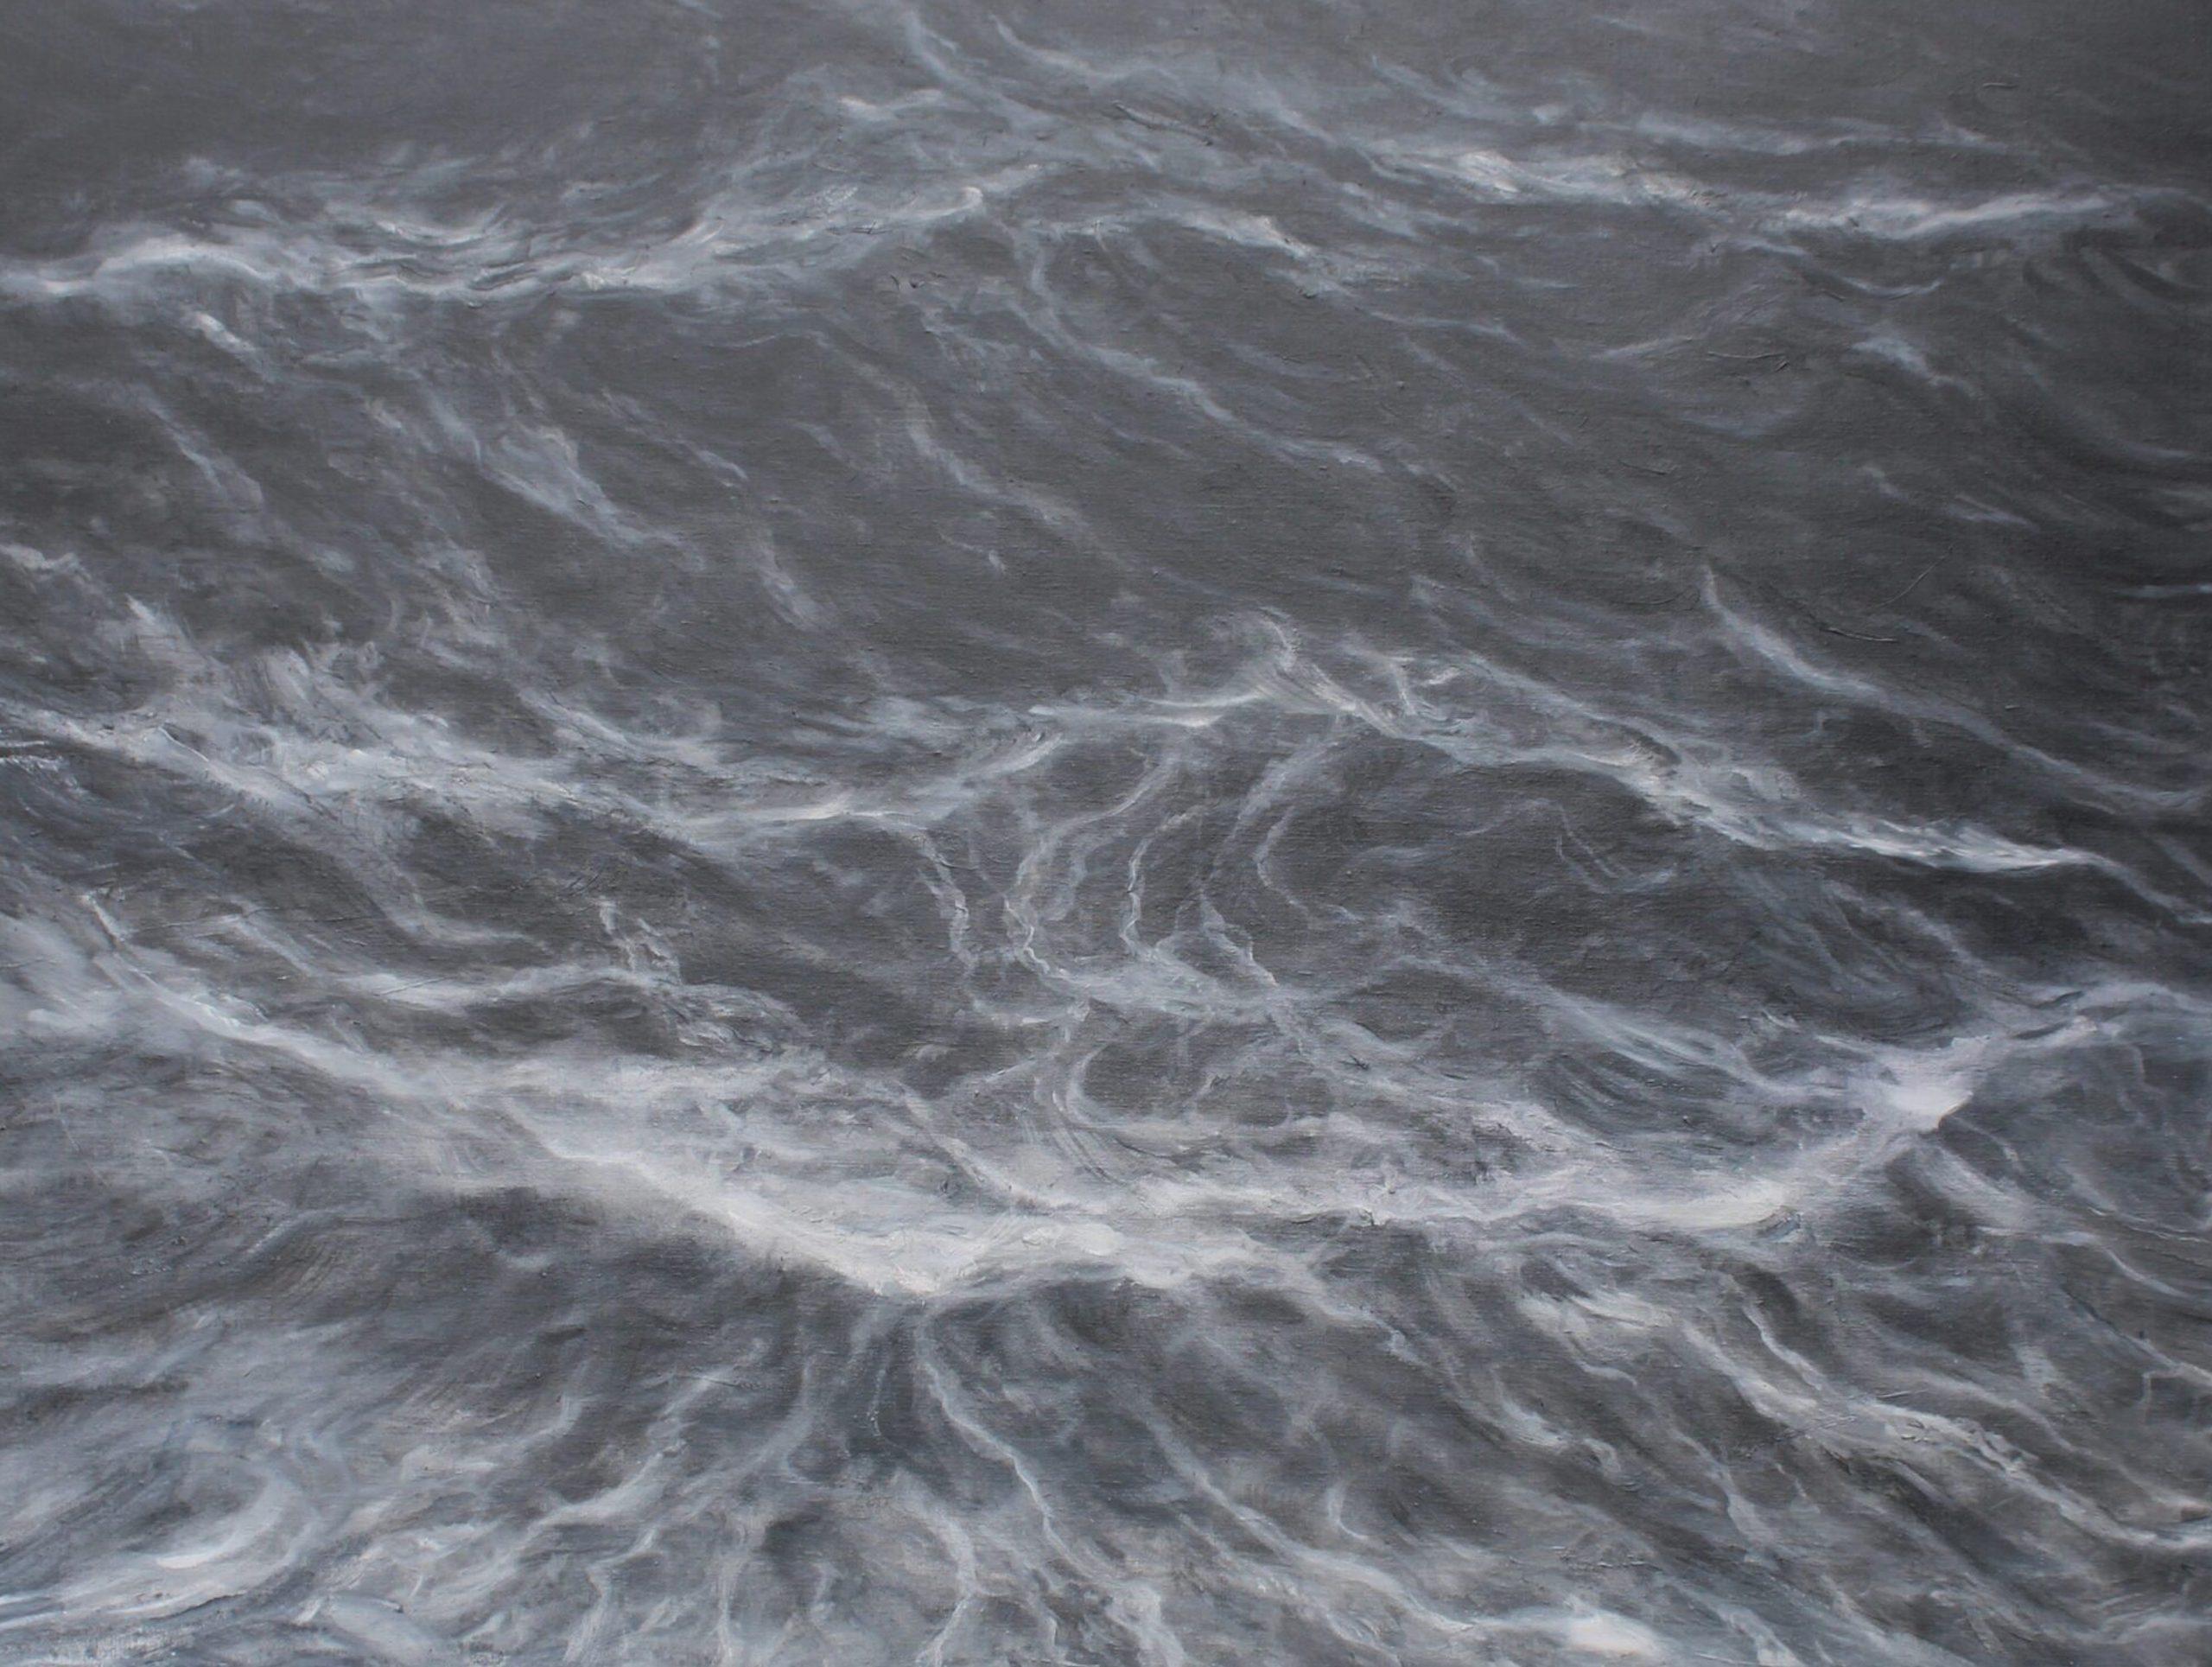 Abstract ocean by Franco Salas Borquez - Black & white painting, ocean waves For Sale 2